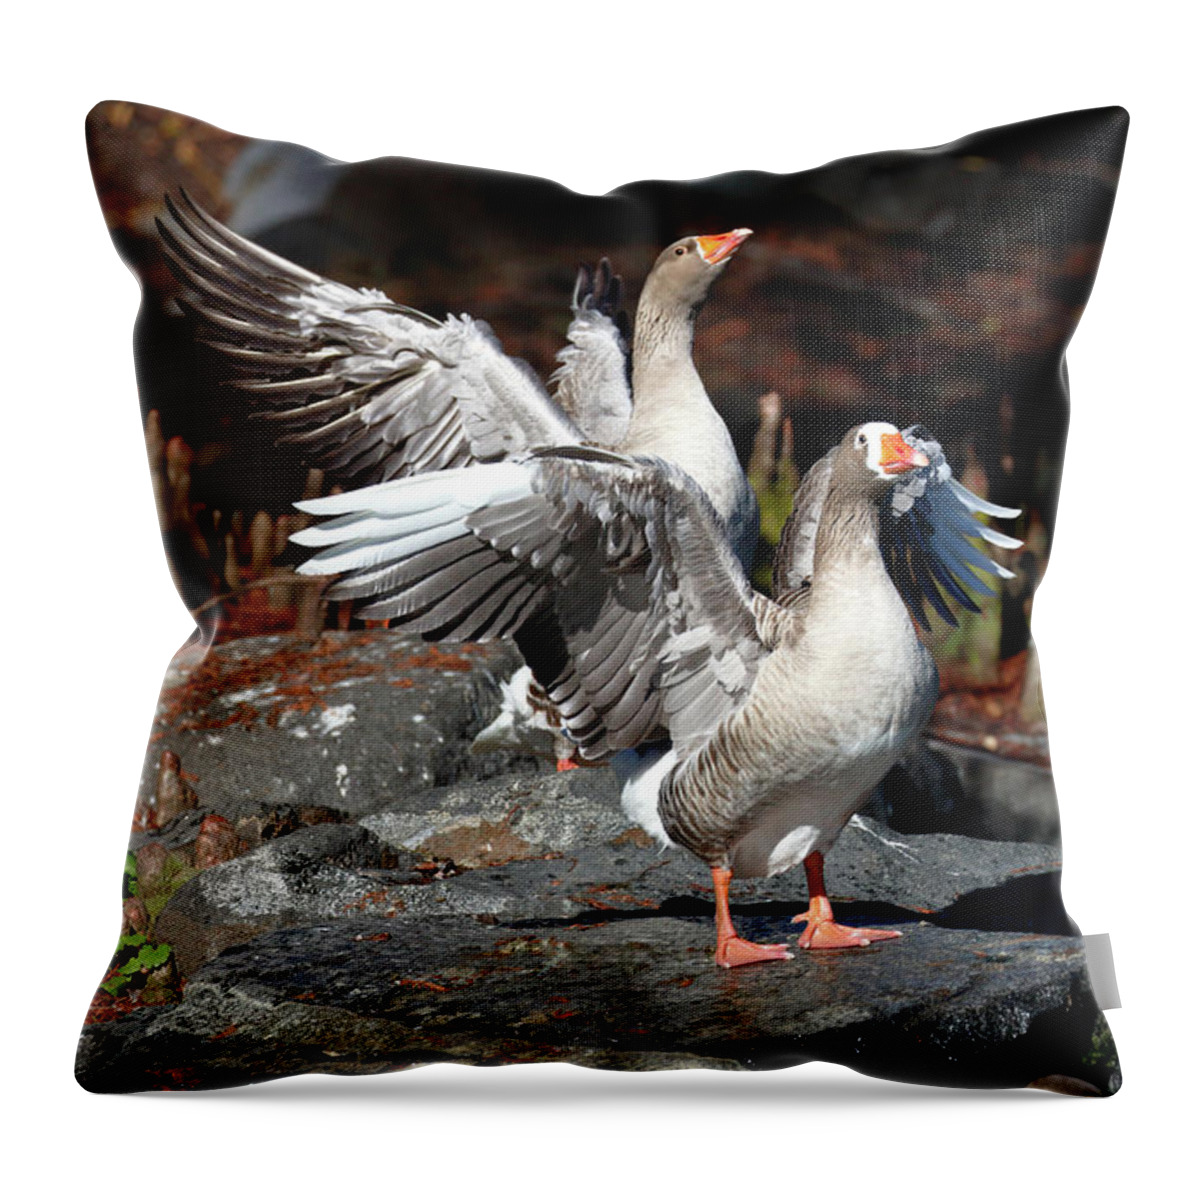 Greylag Goose Throw Pillow featuring the photograph Greylag Geese by Nicholas Blackwell